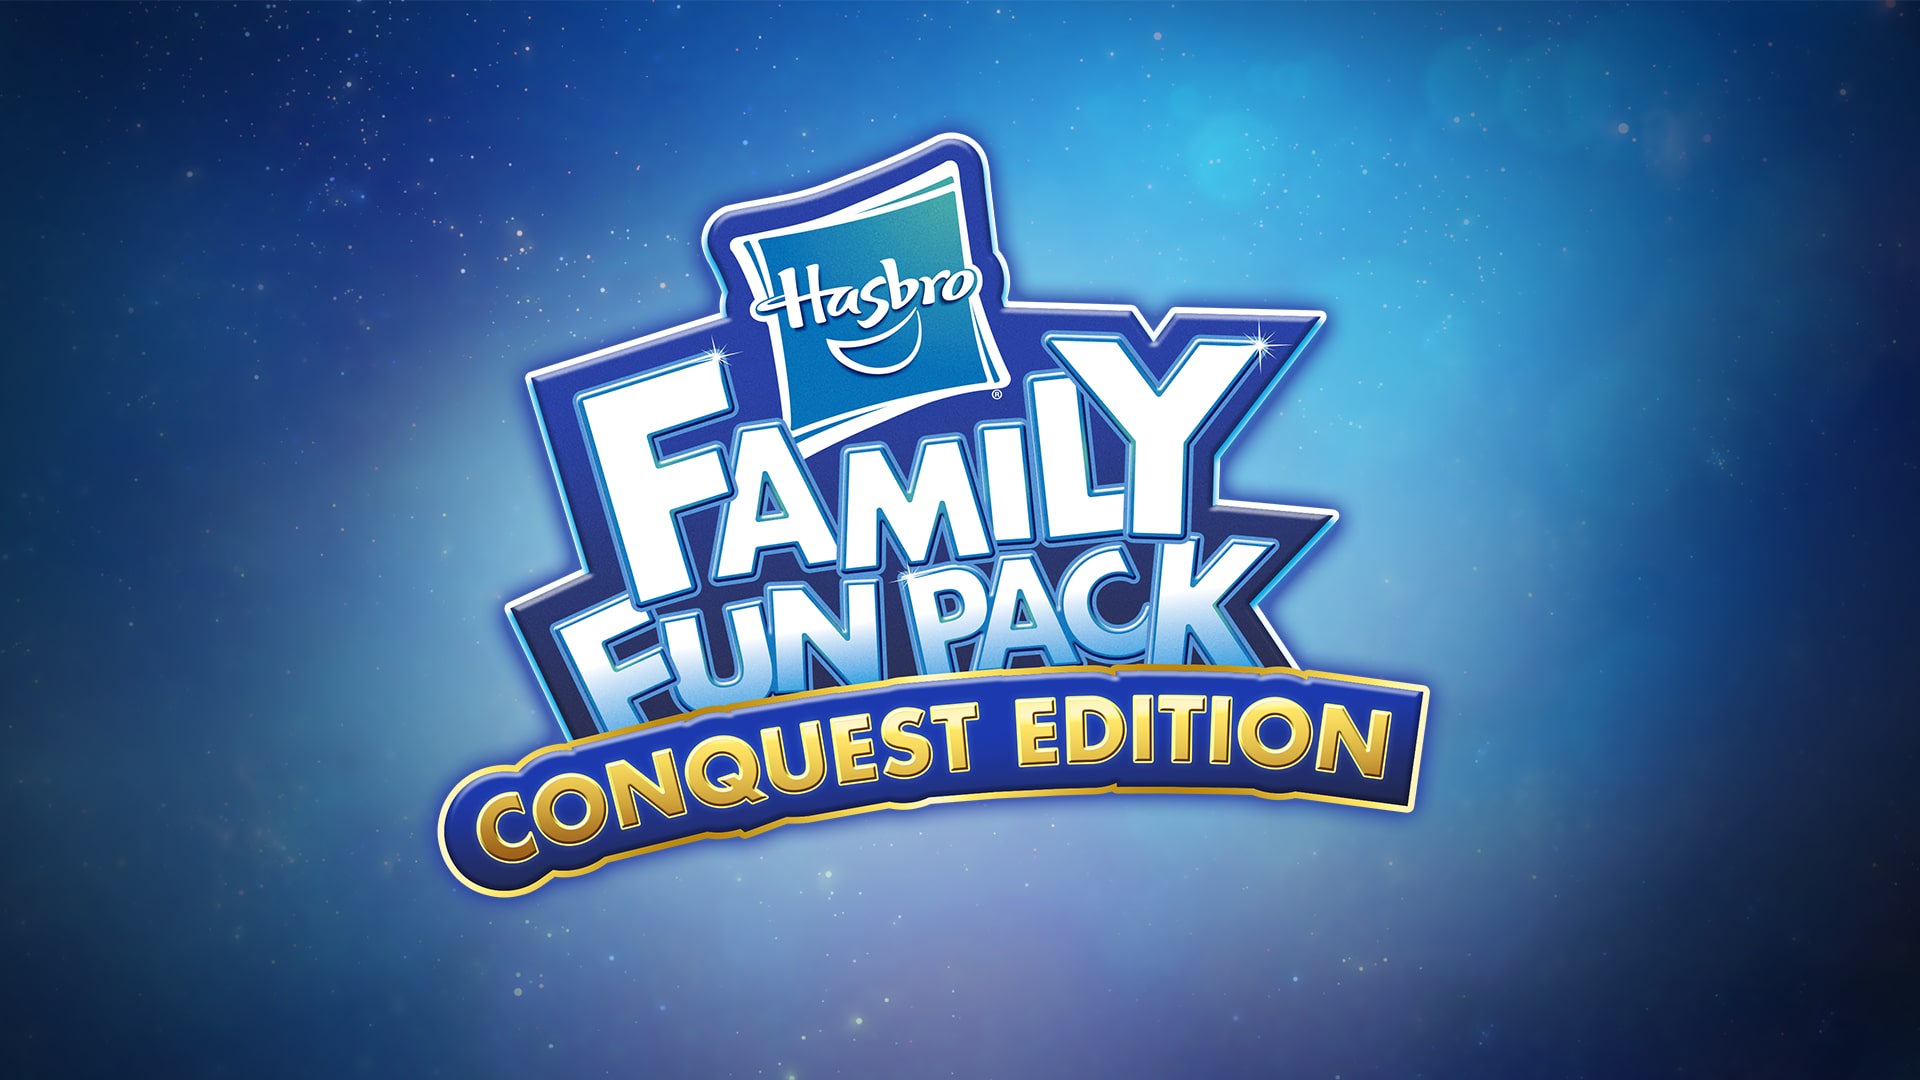 Hasbro Family Fun Pack - Conquest Edition